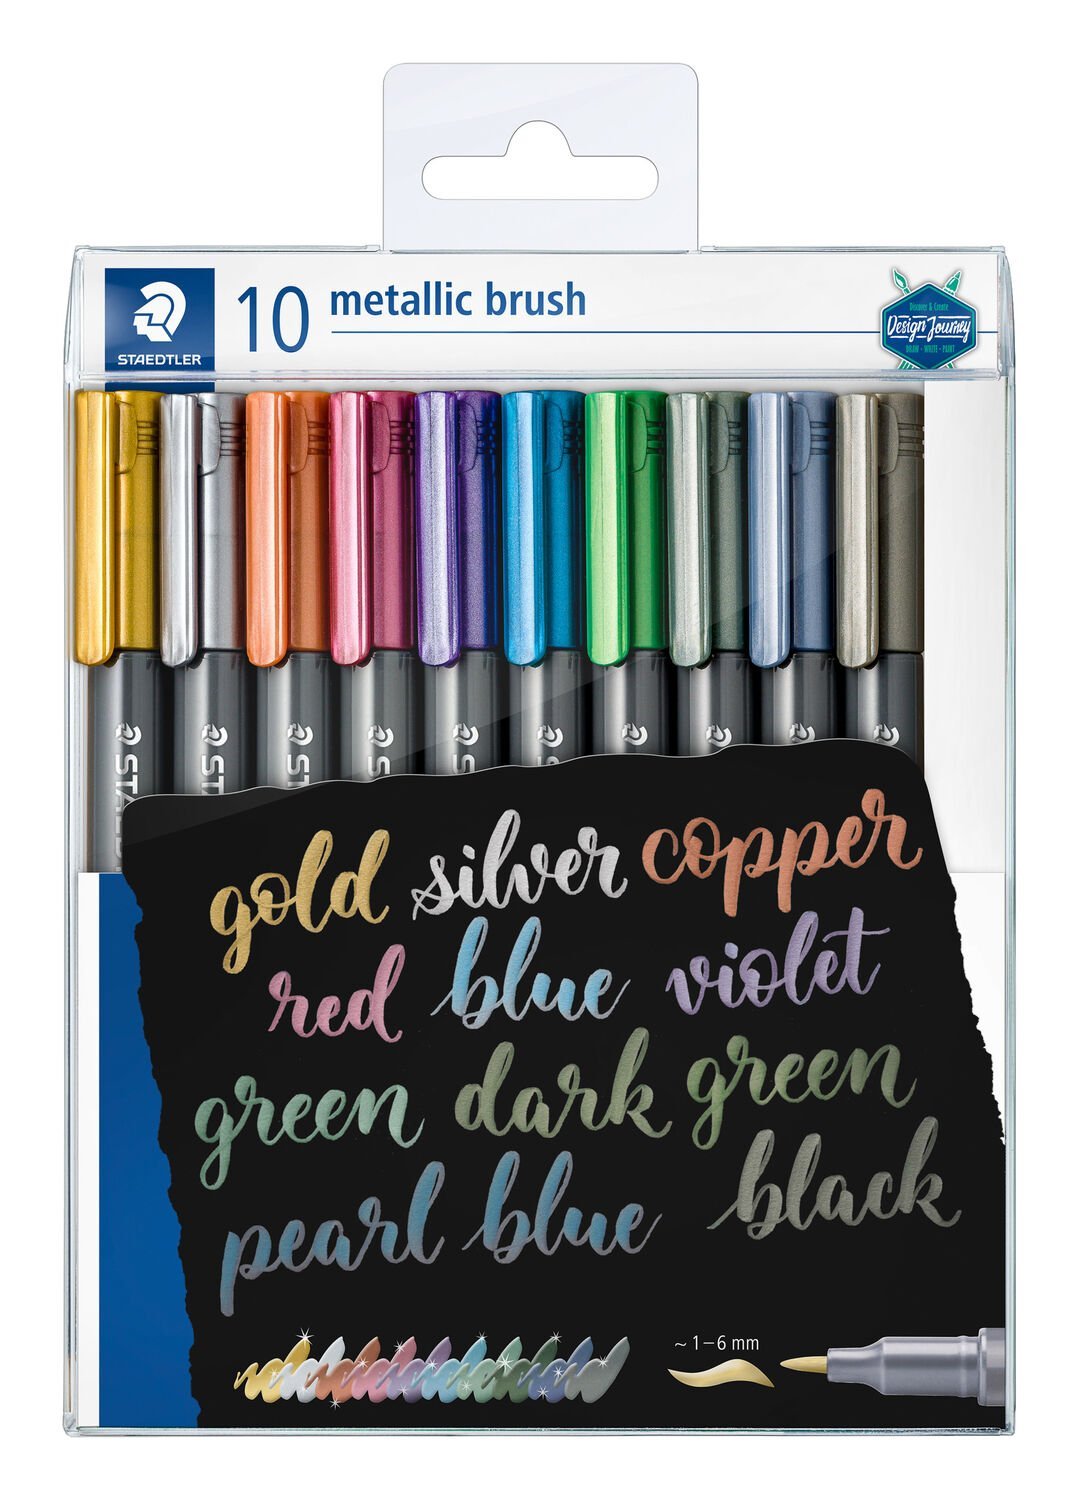 Wallet containing 10 metallic brush in assorted colours